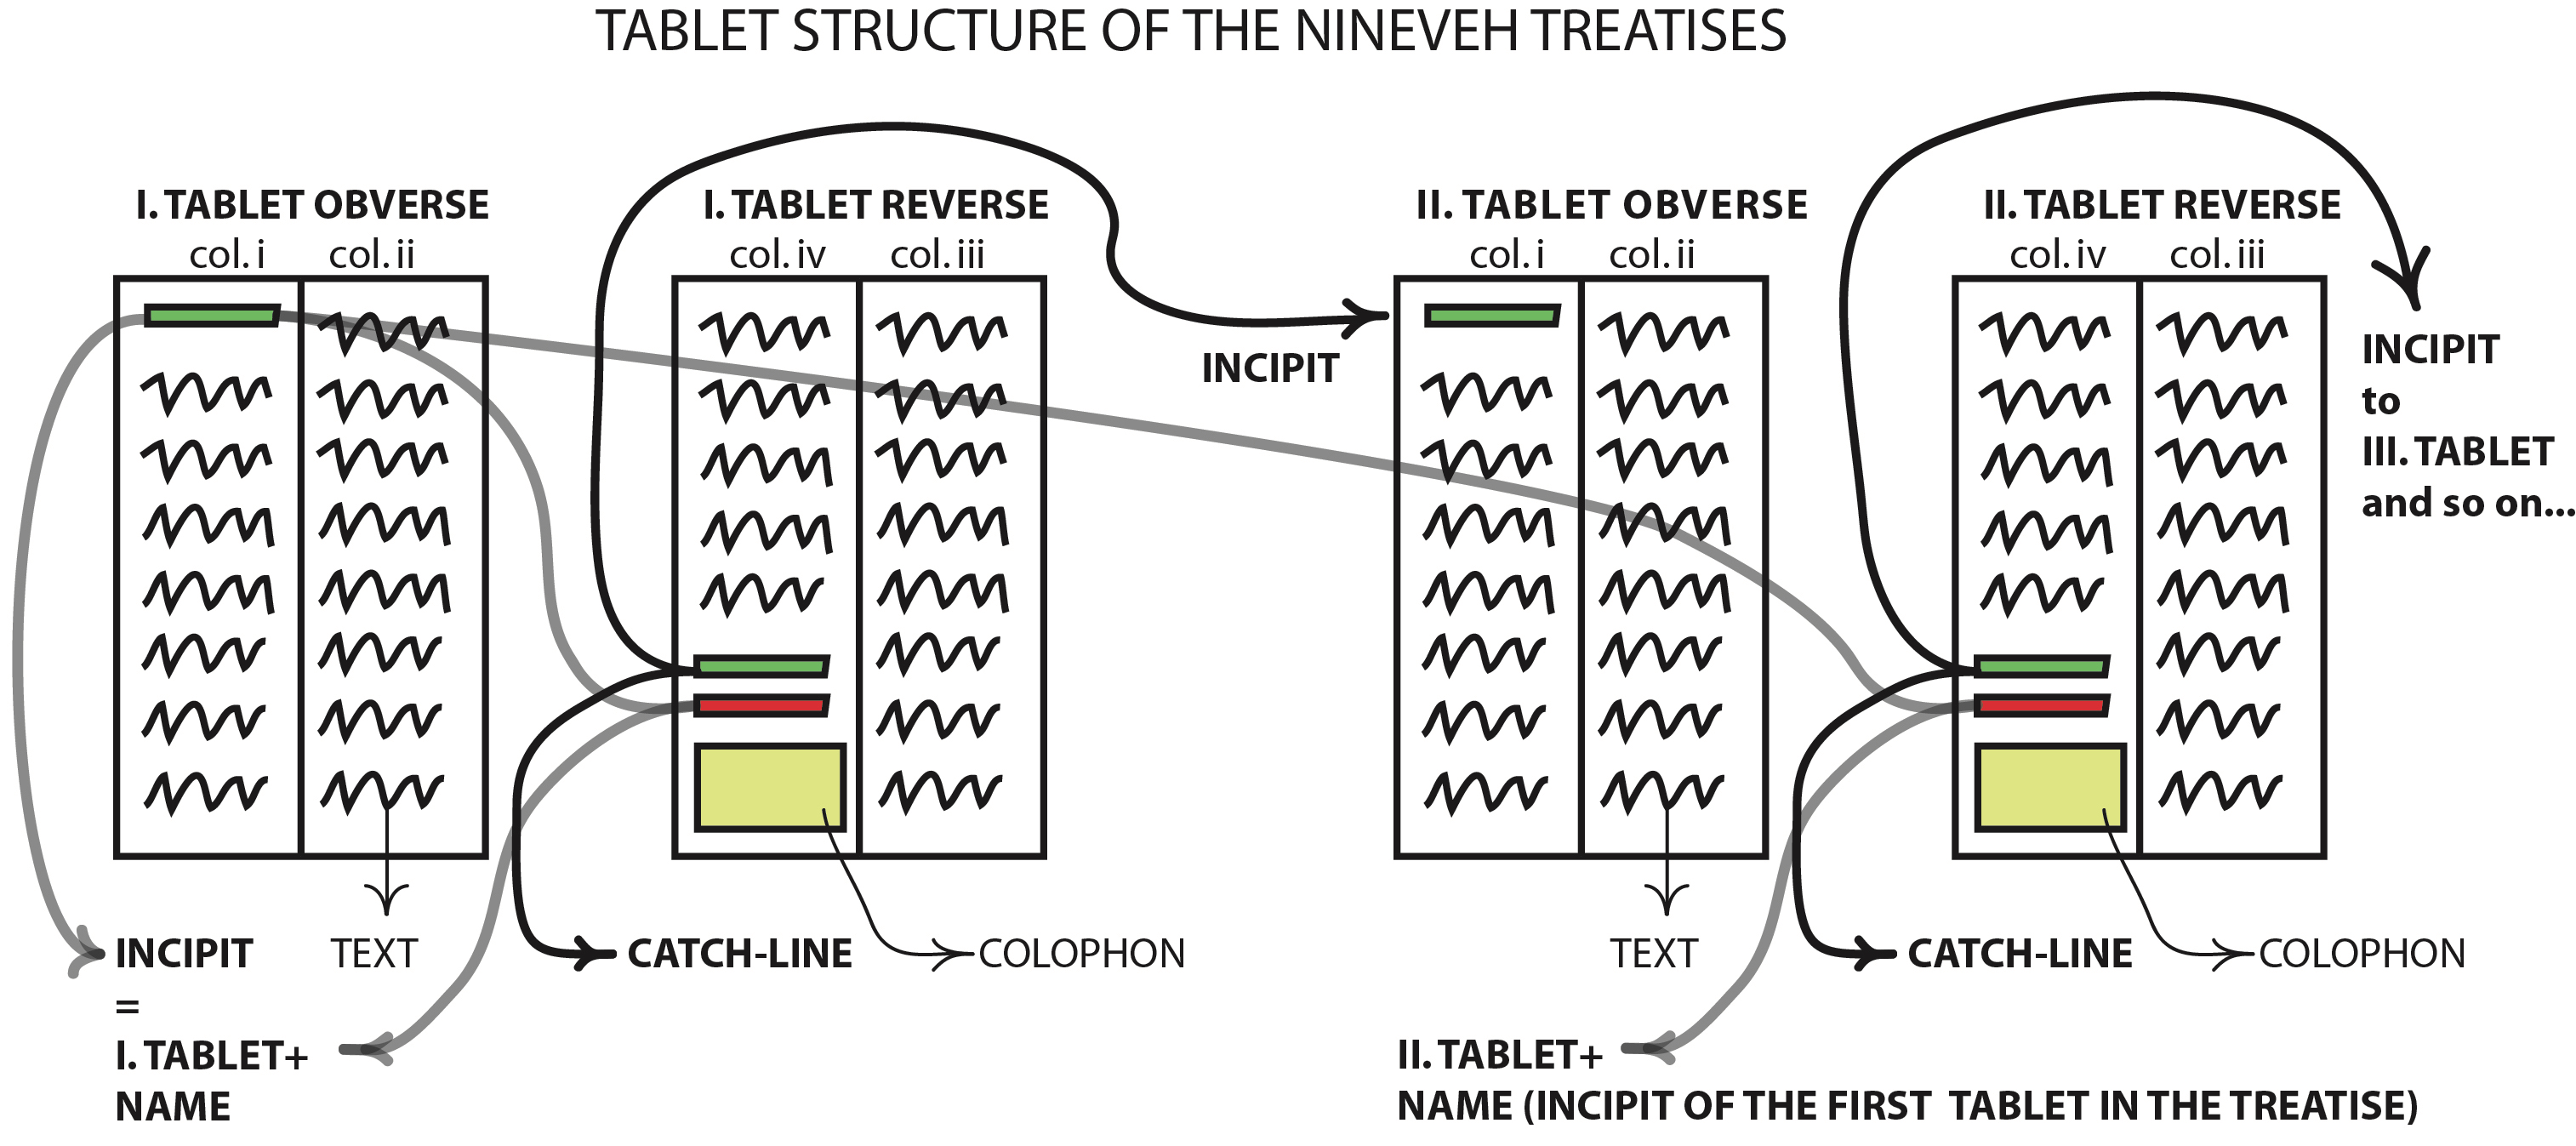 Schematic image of a tablet from the Nineveh Medical Encyclopaedia